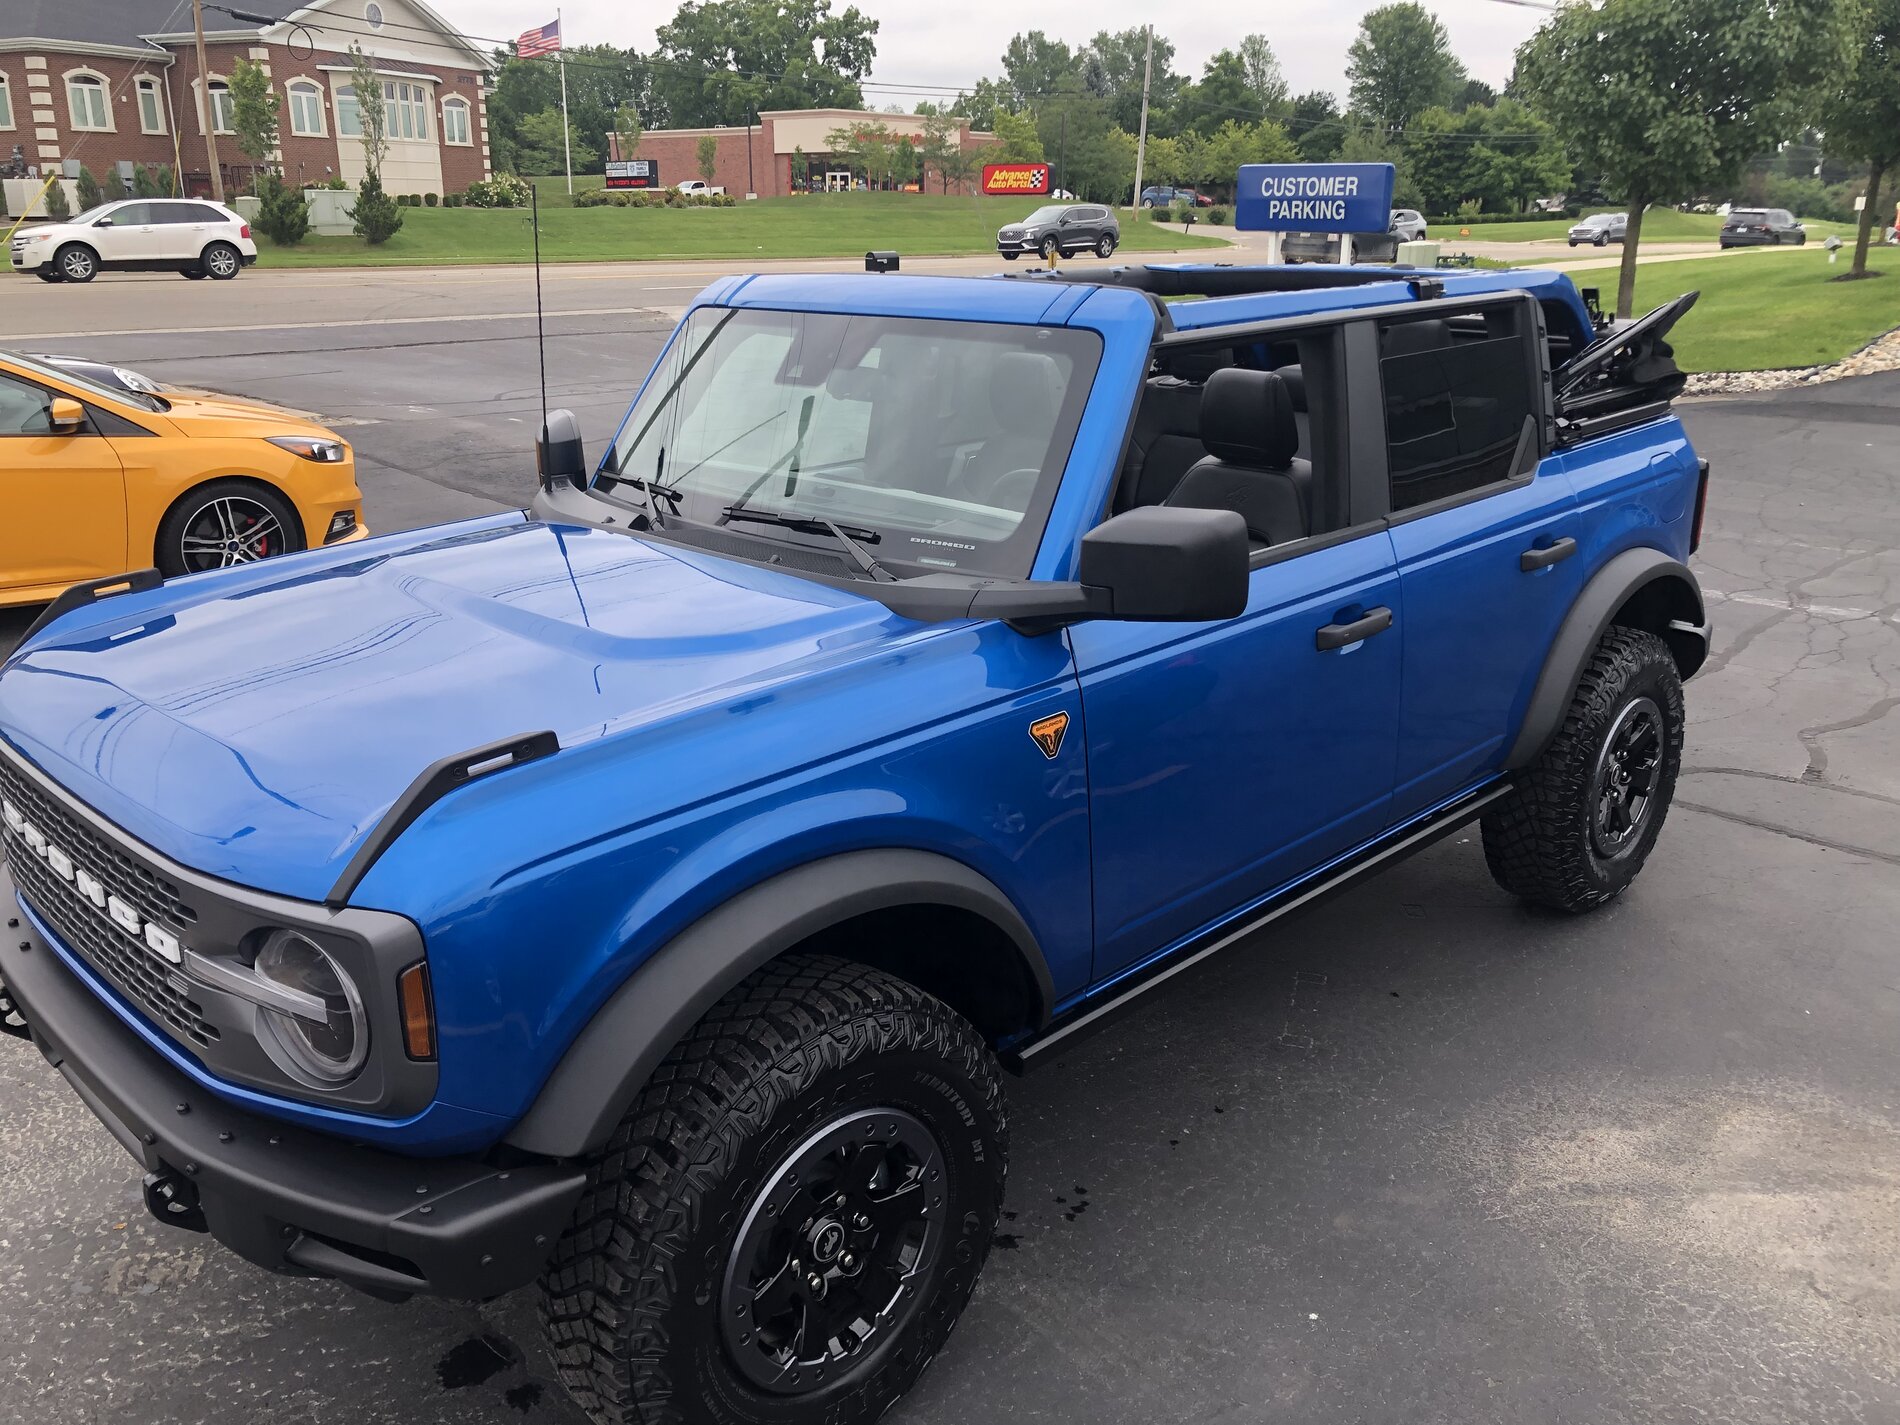 Ford Bronco Blue beast has been freed from MAP. BD6742A3-0531-443B-9121-C12A4C9A6C07